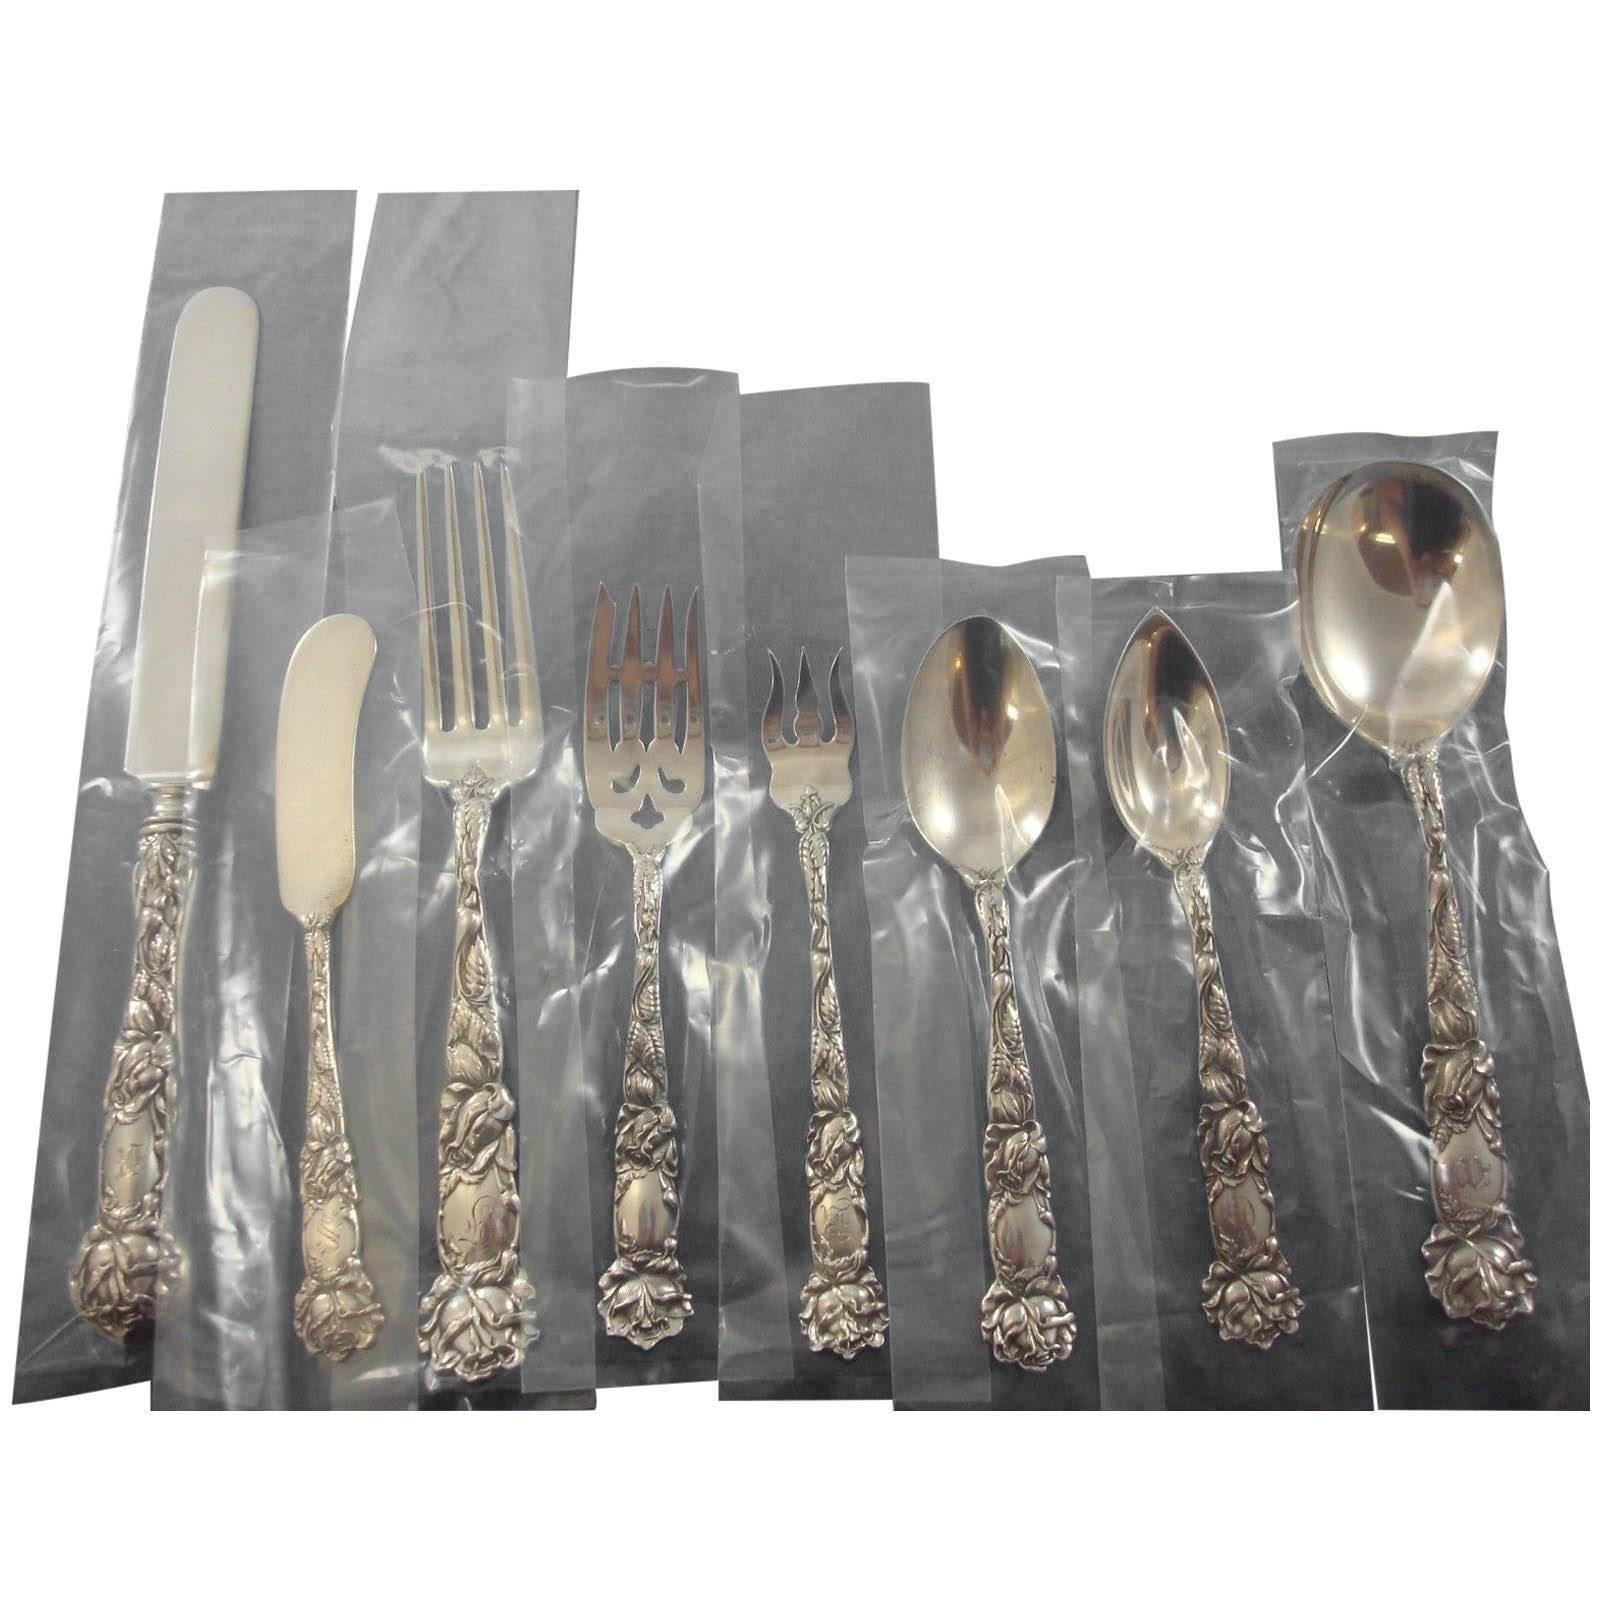 Beautiful Art Nouveau Bridal Rose by Alvin vintage dinner size sterling silver set of 98 pieces. This set includes:

12 dinner size knives, 9 3/4